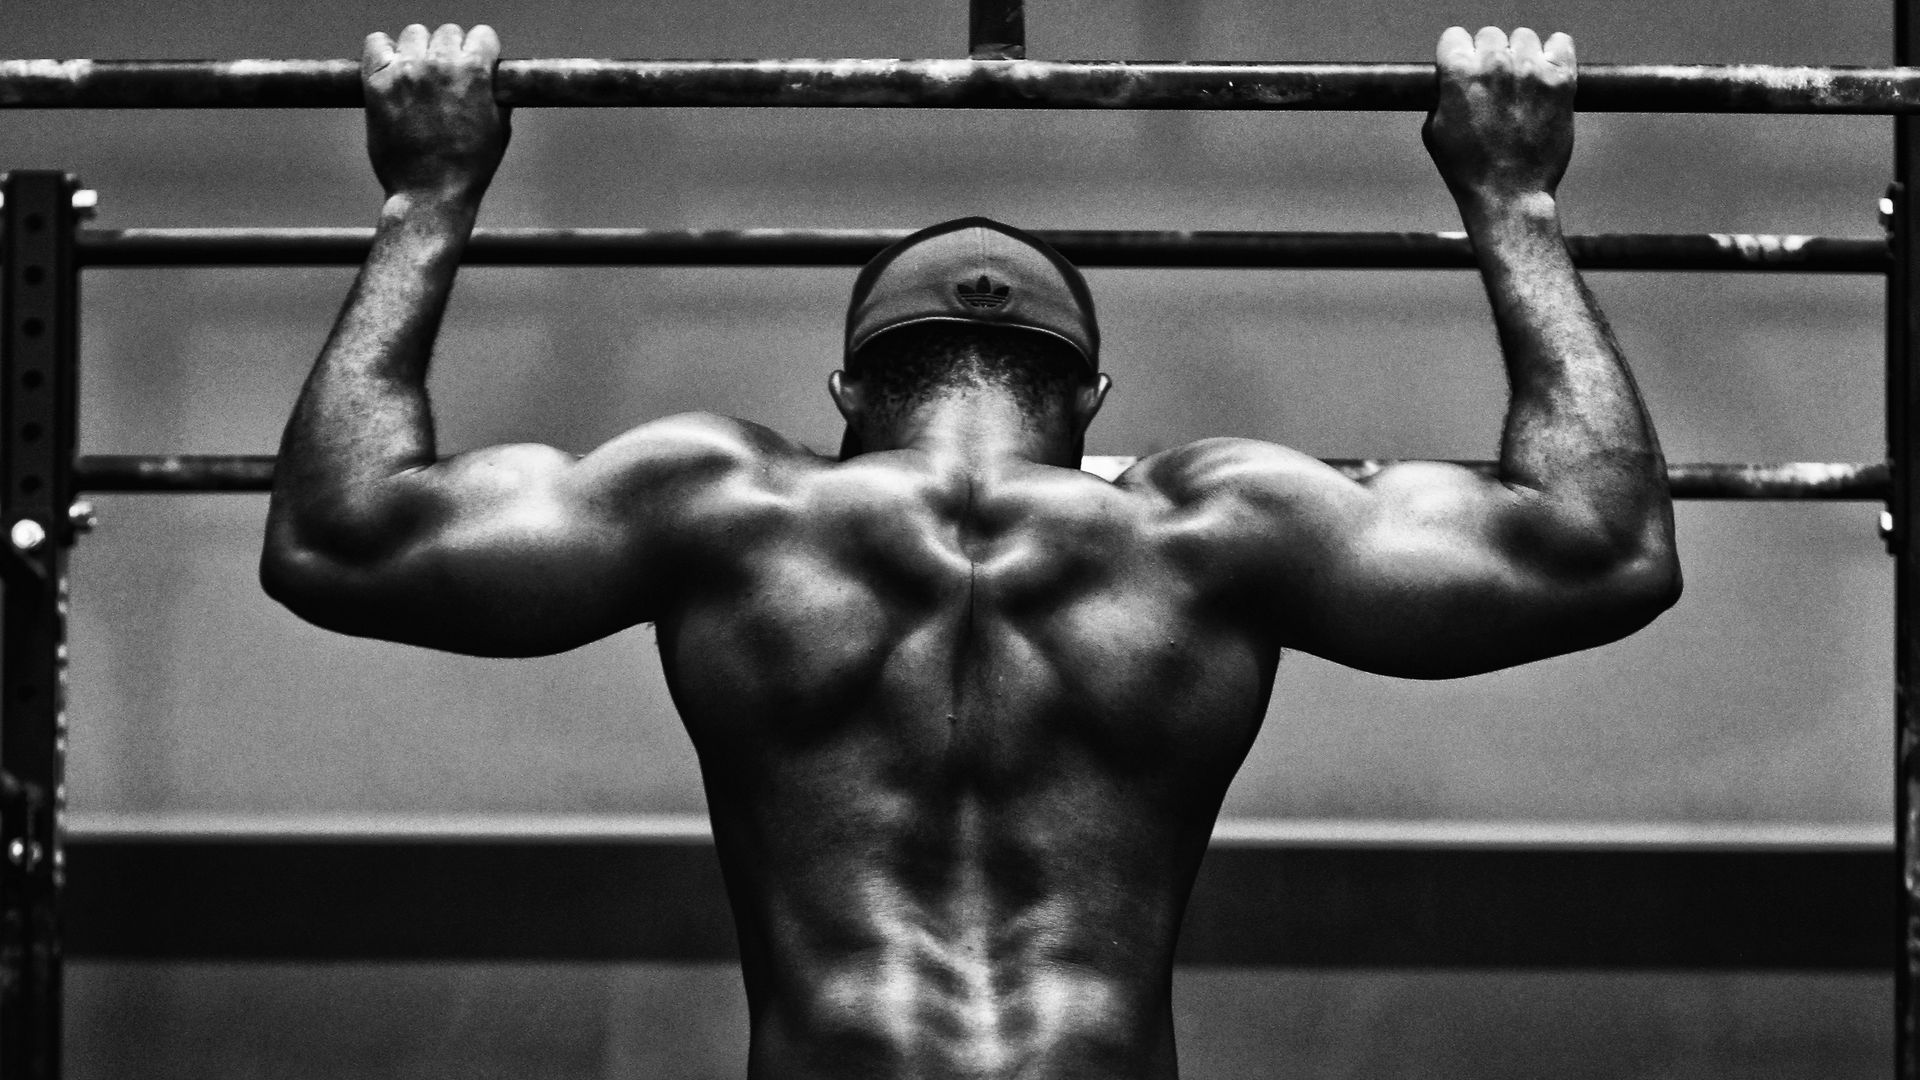 Download wallpaper 1920x1080 pull-ups, man, workout, bw, muscle, athlete,  horizontal bar full hd, hdtv, fhd, 1080p hd background